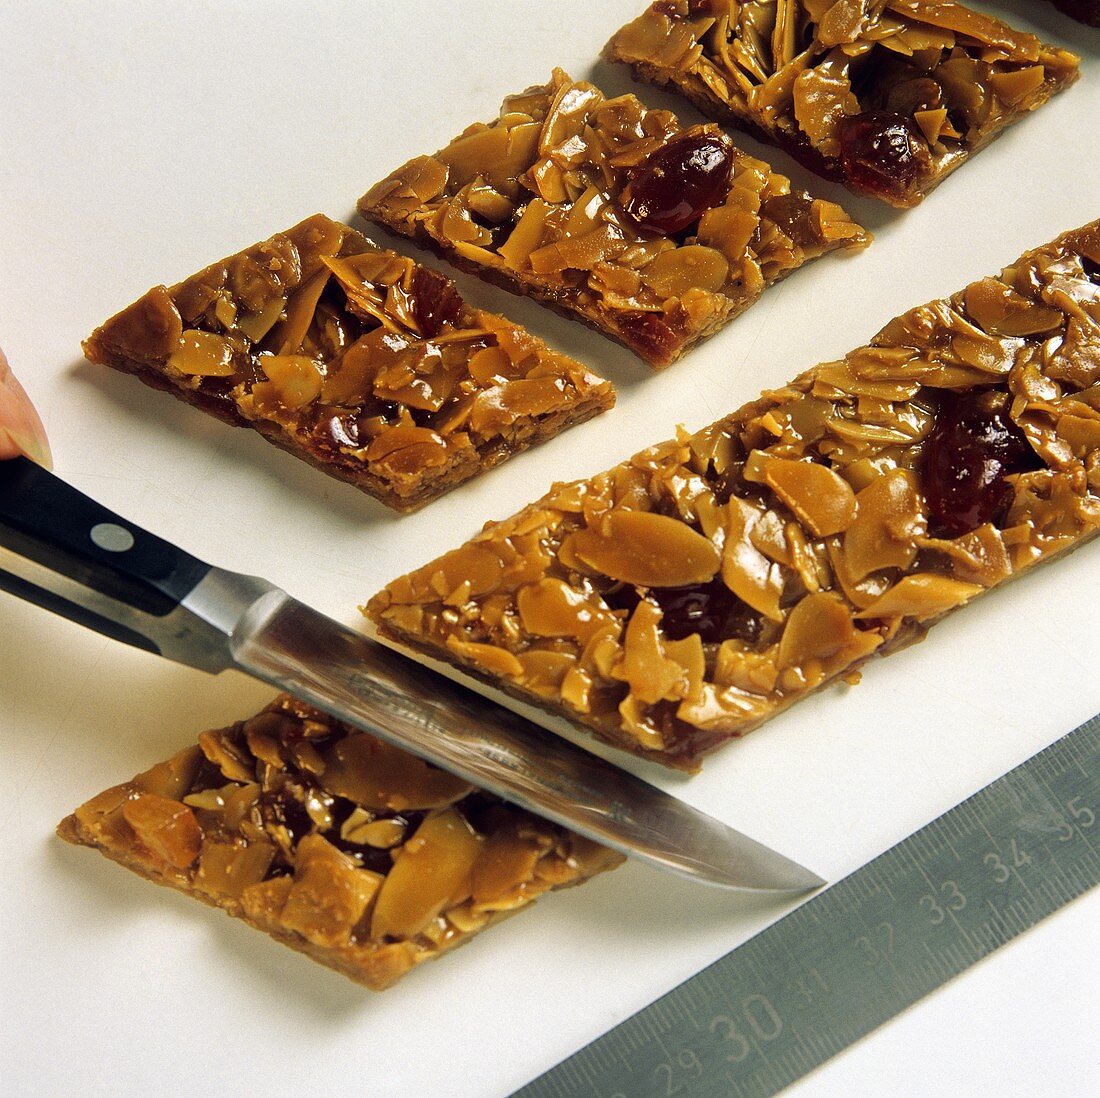 Cutting out diamond-shaped florentines